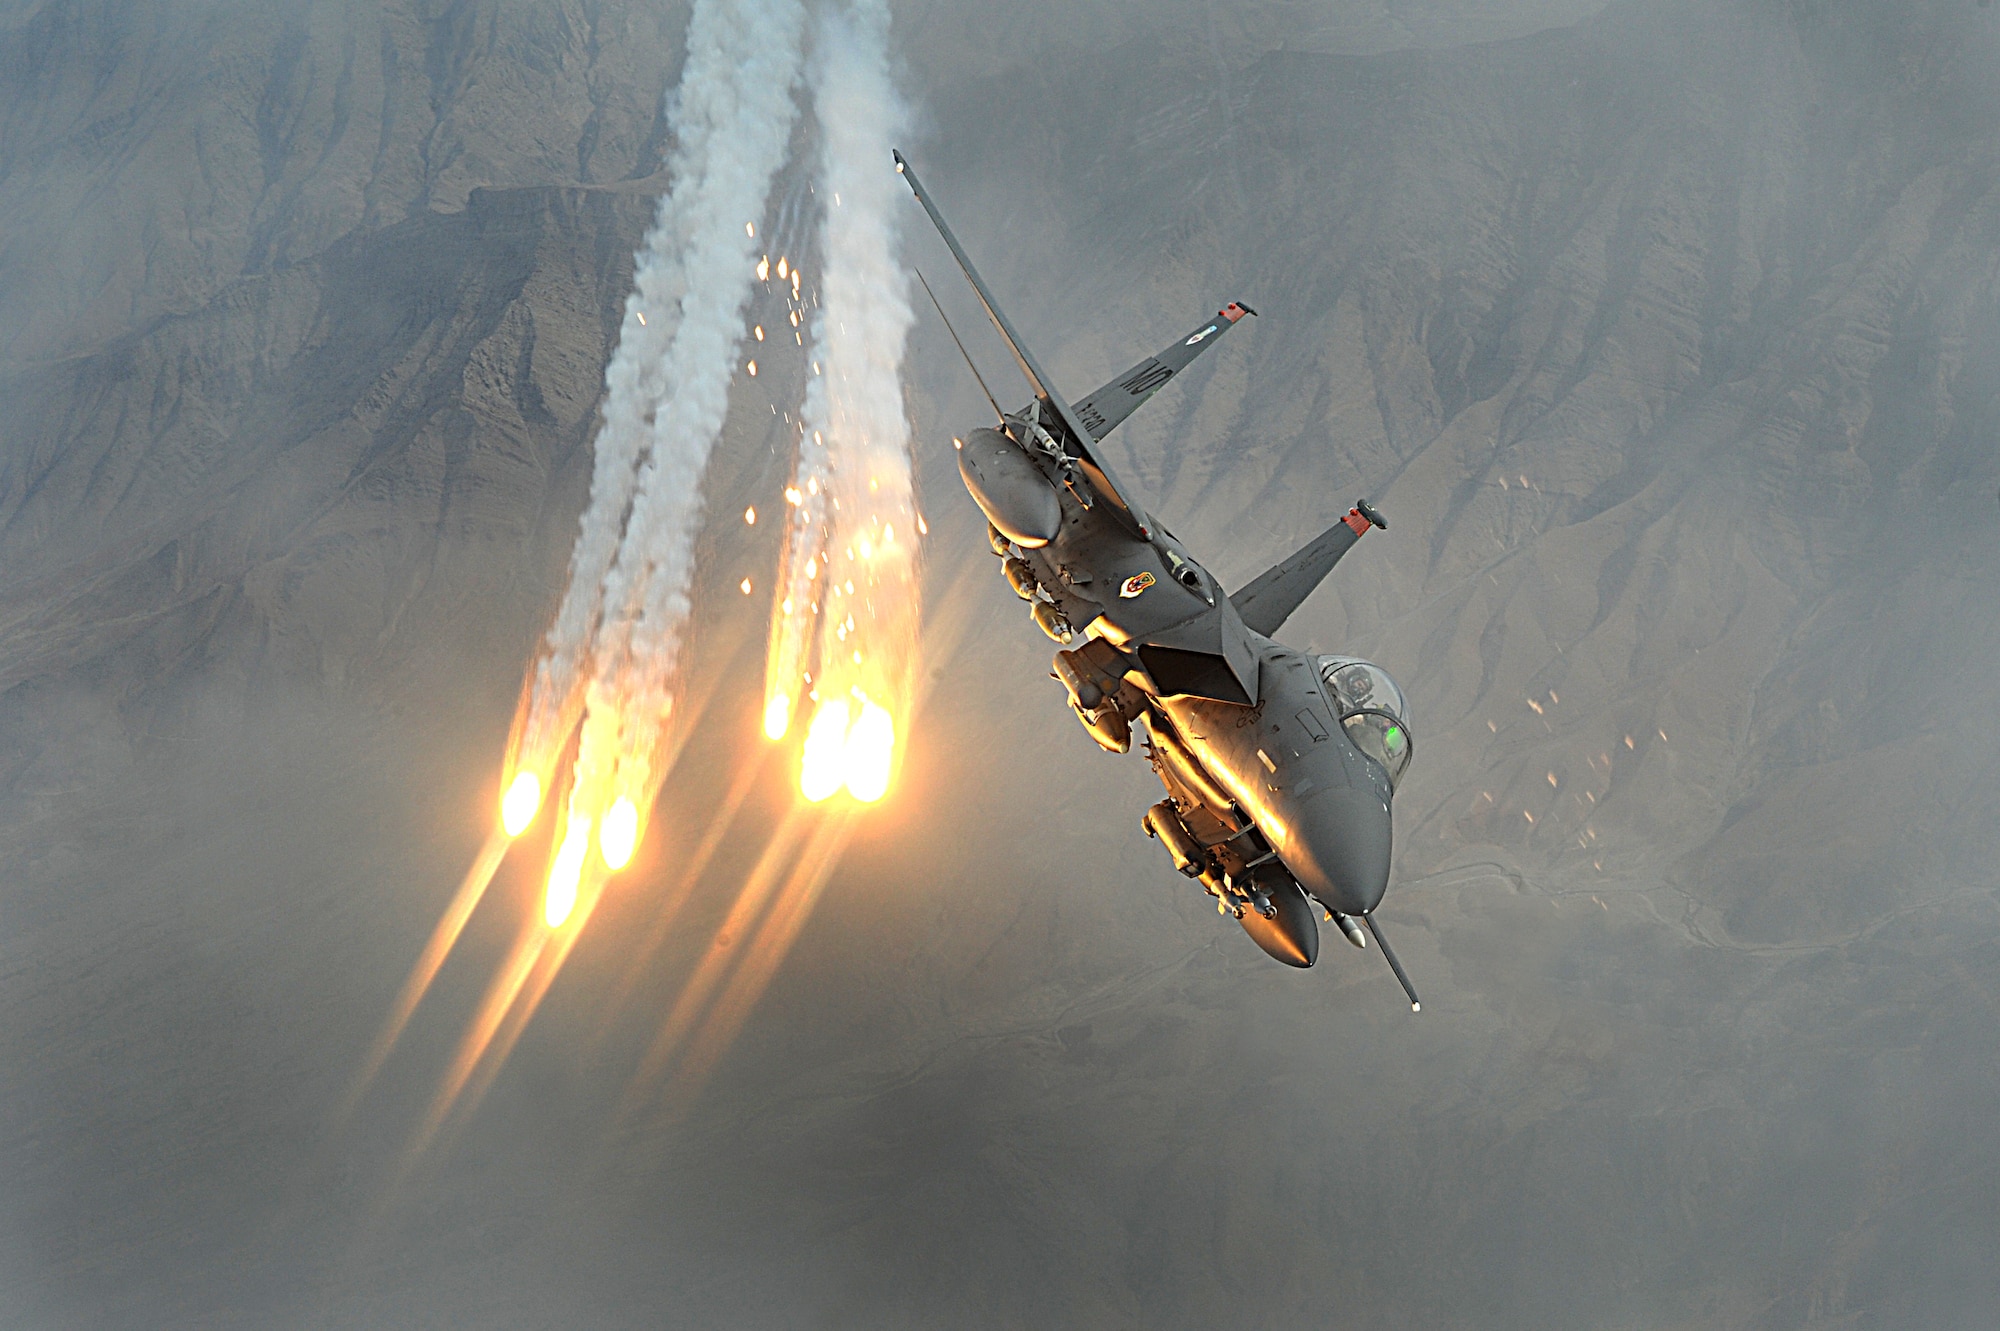 An F-15E Strike Eagle aircraft from the 391st Expeditionary Fighter Squadron, Bagram Air Base, Afghanistan, deploys heat decoys during a combat patrol over Afghanistan Dec. 15, 2008. (DoD photo by Staff Sgt. Aaron Allmon, U.S. Air Force/Released) 